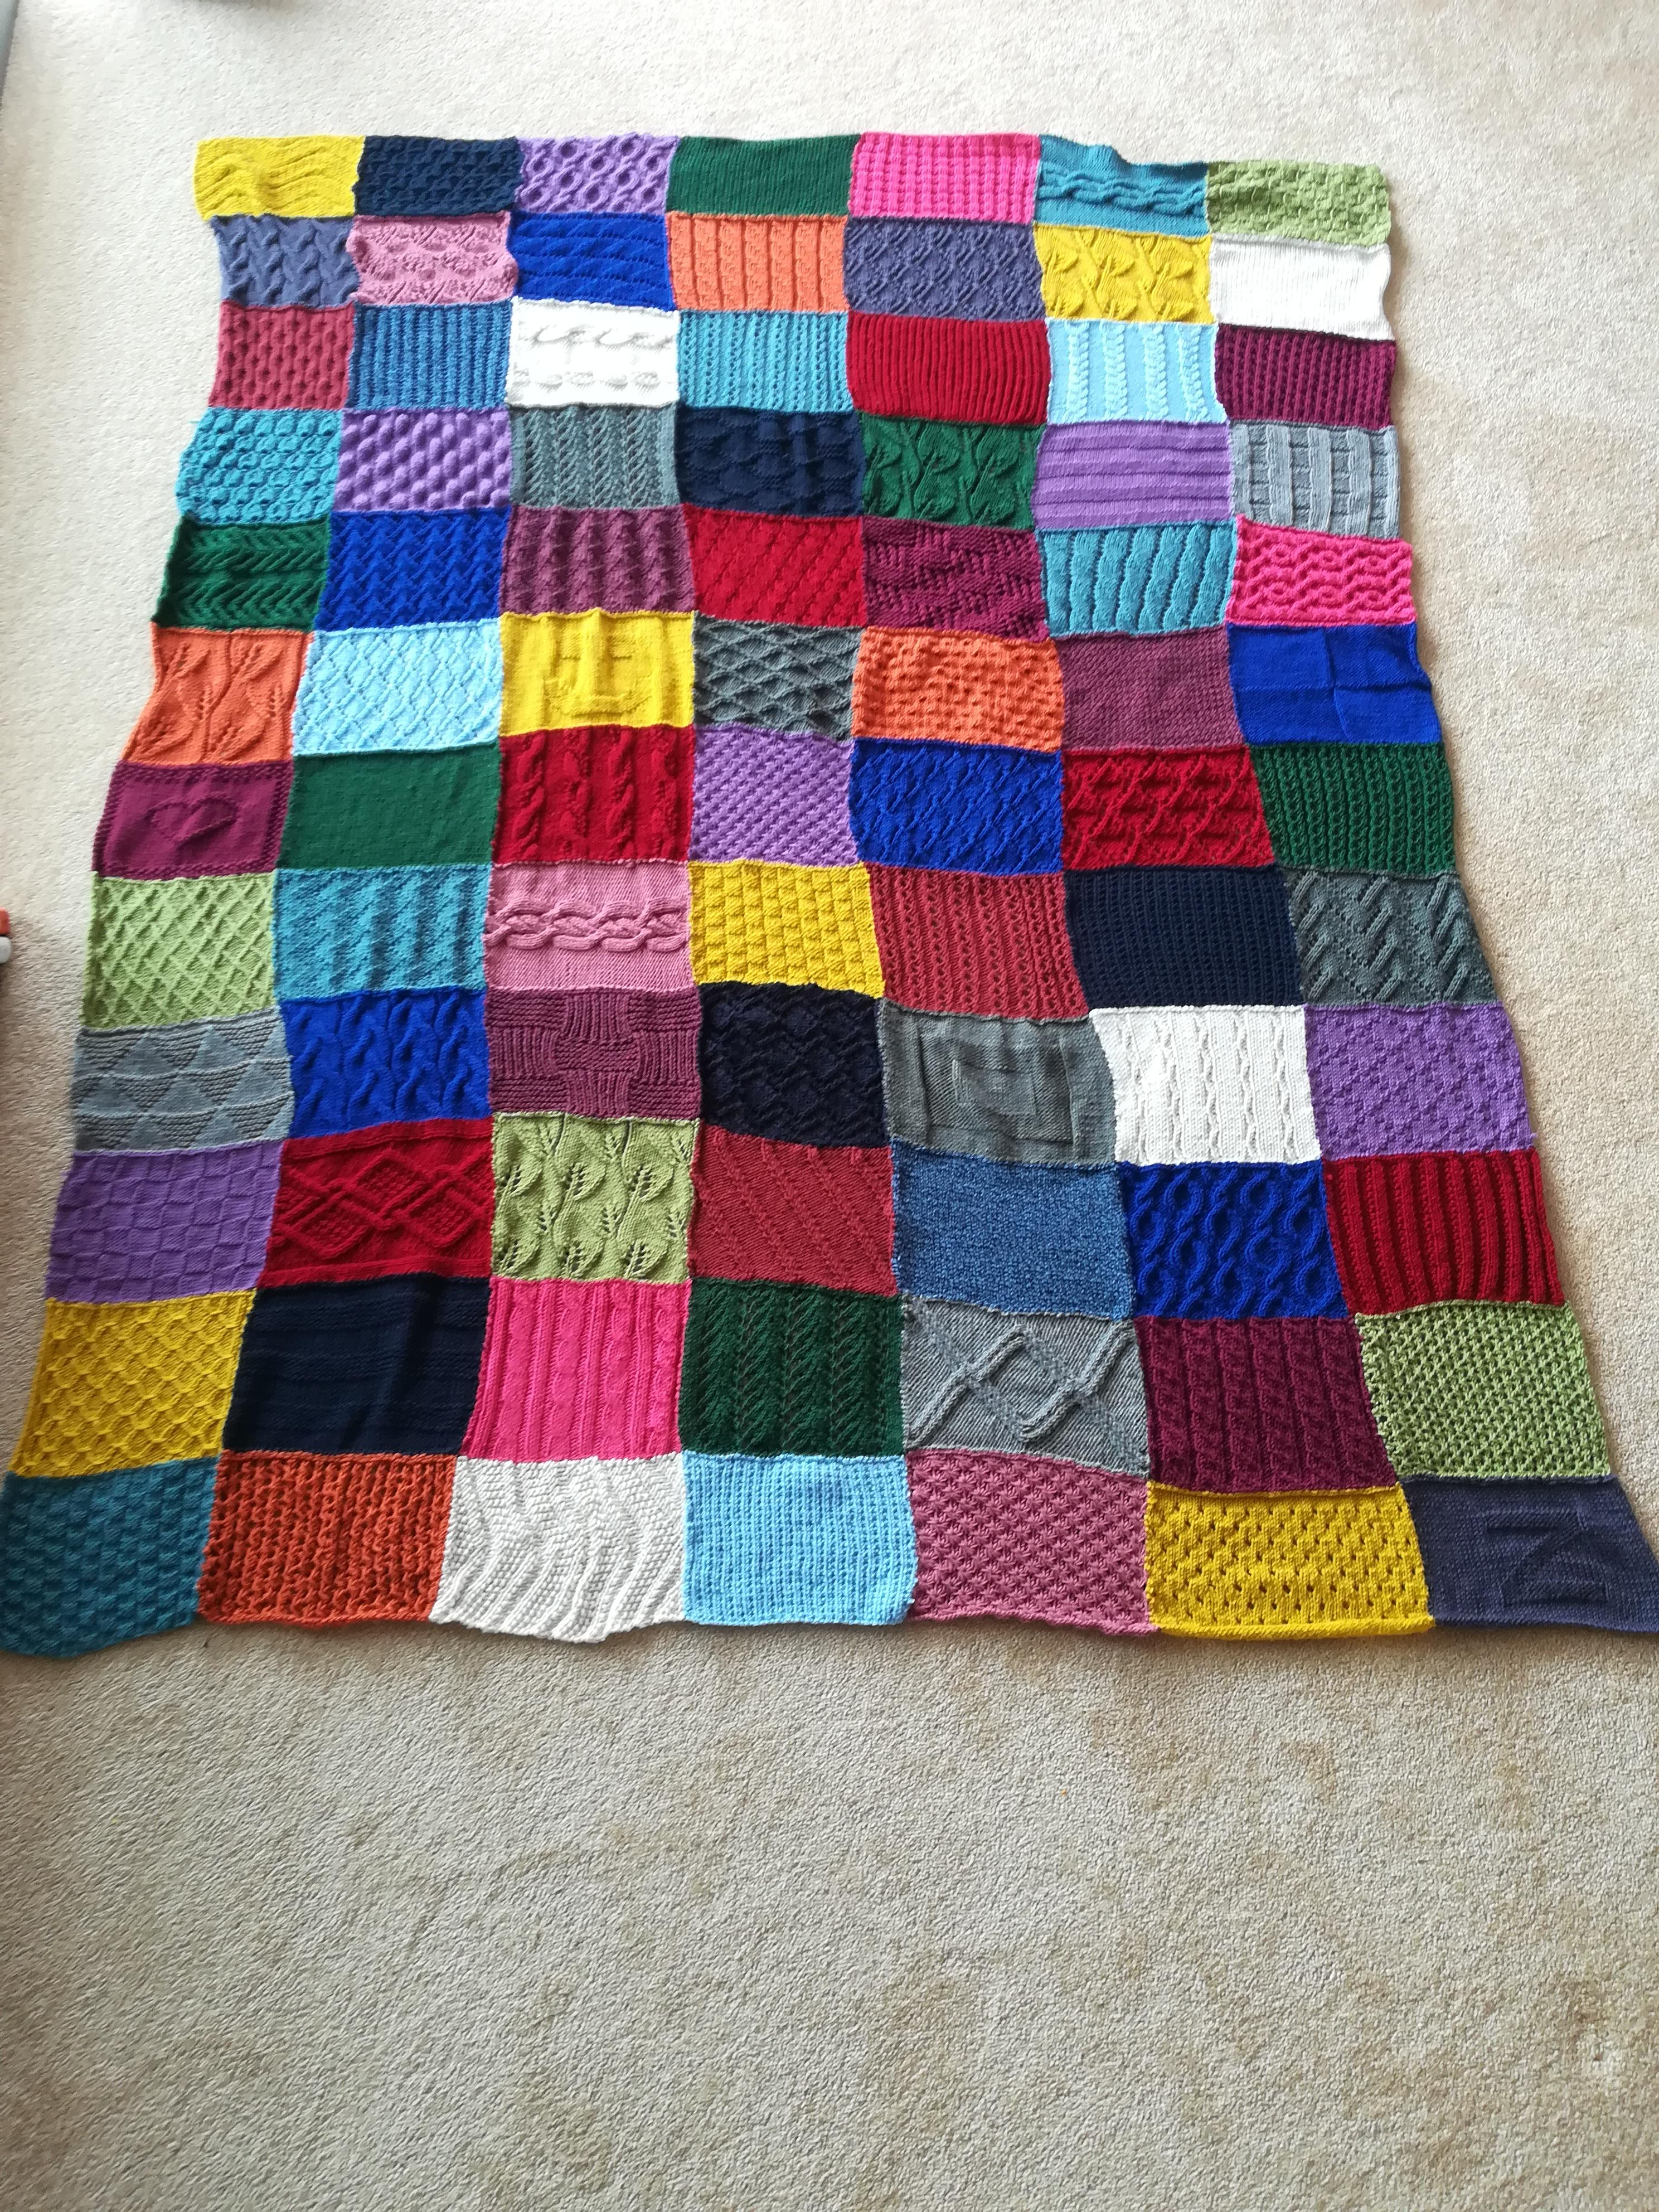 Patchwork Knitting Patterns For Blankets Its Finally Done My Huge Patchwork Blanket Knitting